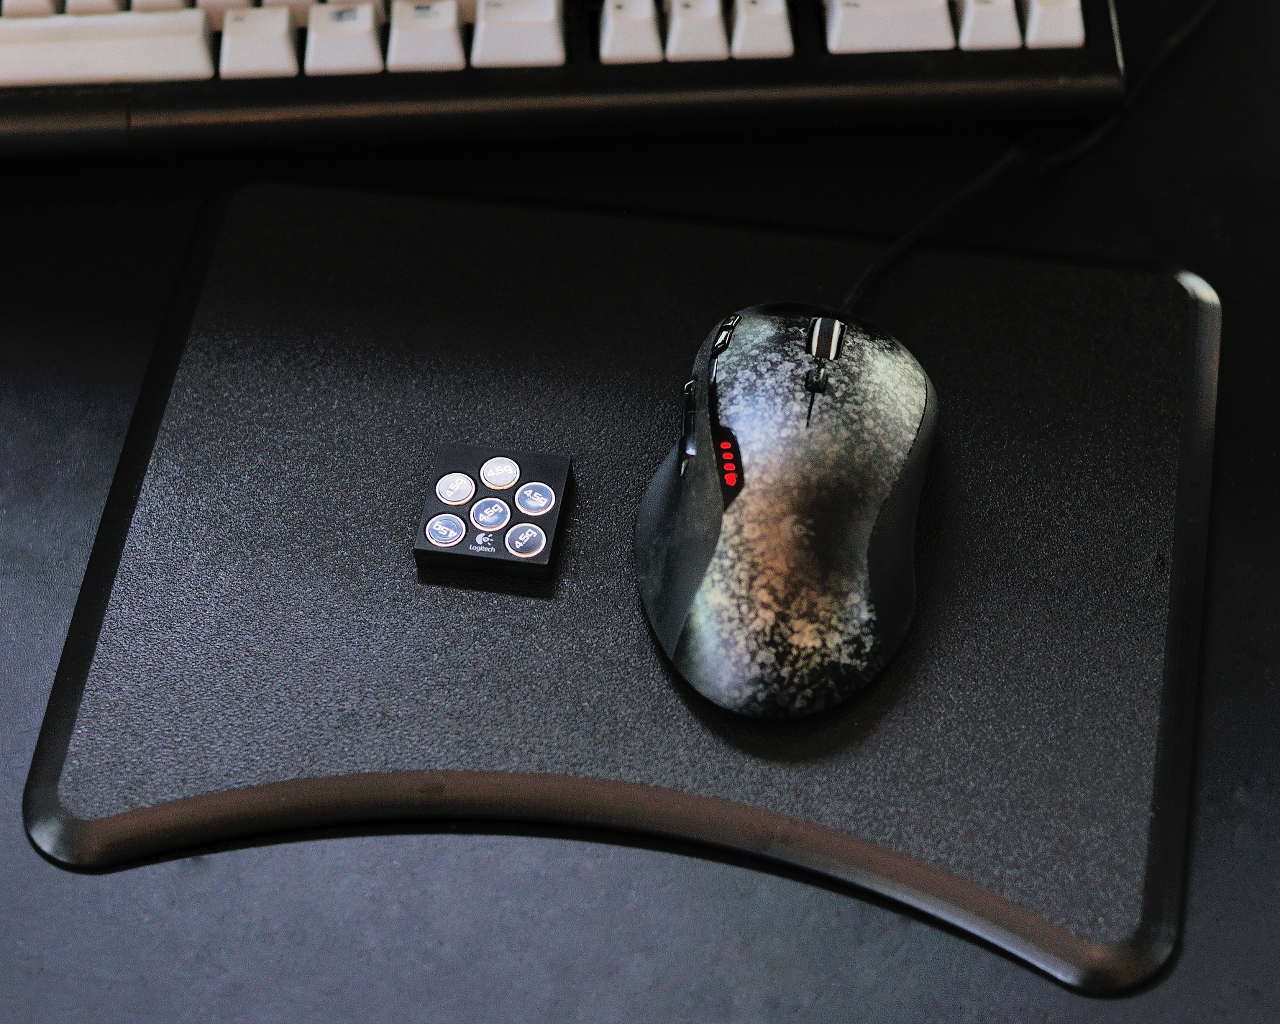 Recommend a replacement for my Logitech G500 mouse? |